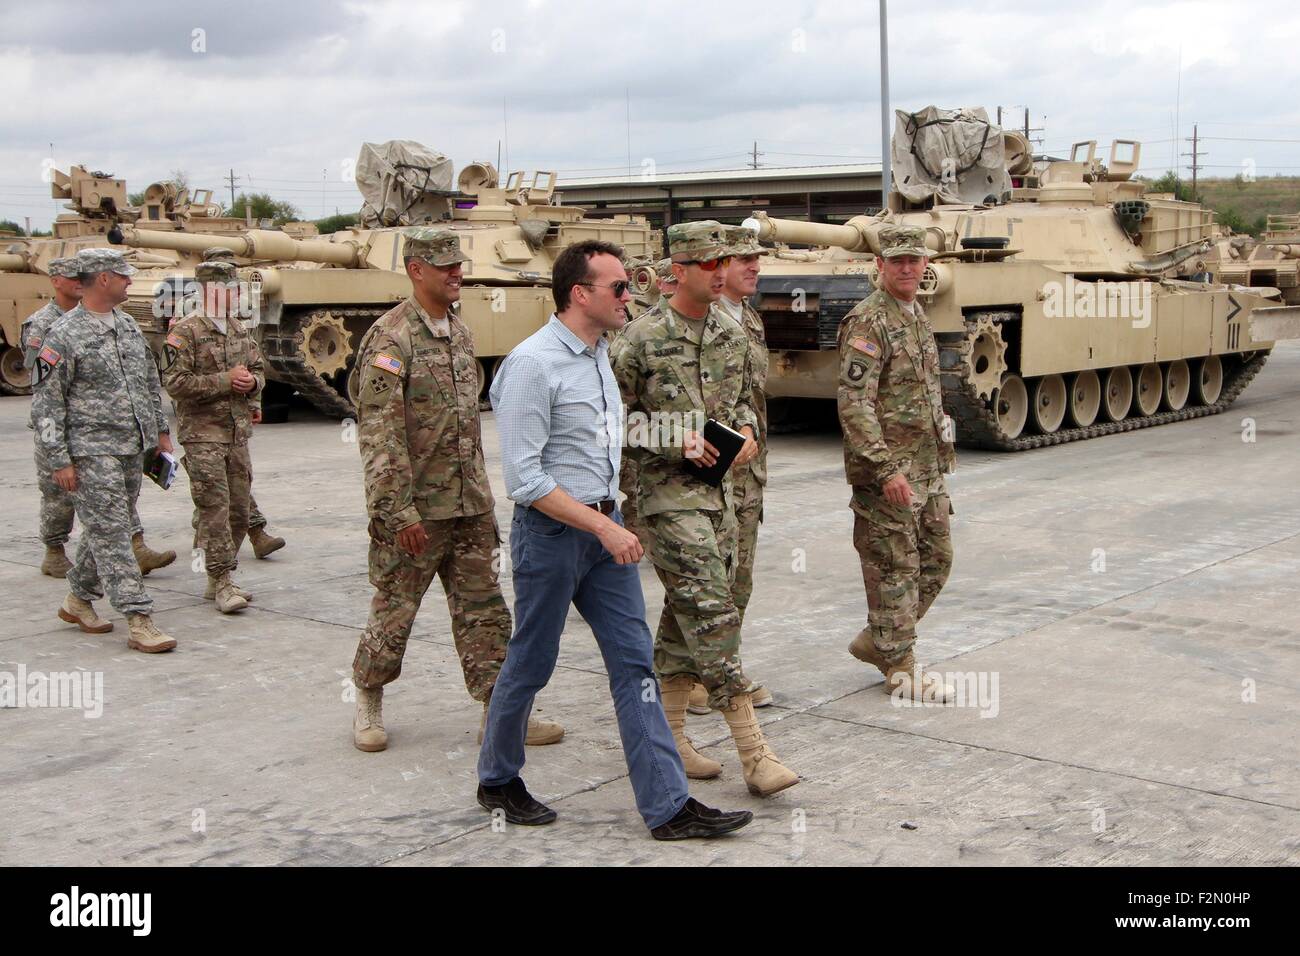 Acting Under Secretary of the Army Eric Fanning visits Fort Hood September 15, 2015 in Killeen, Texas. President Obama, in a historic first for the Pentagon, has chosen to nominate Eric Fanning to lead the Army, a move that would make him the first openly gay civilian secretary of one of the military services. Stock Photo